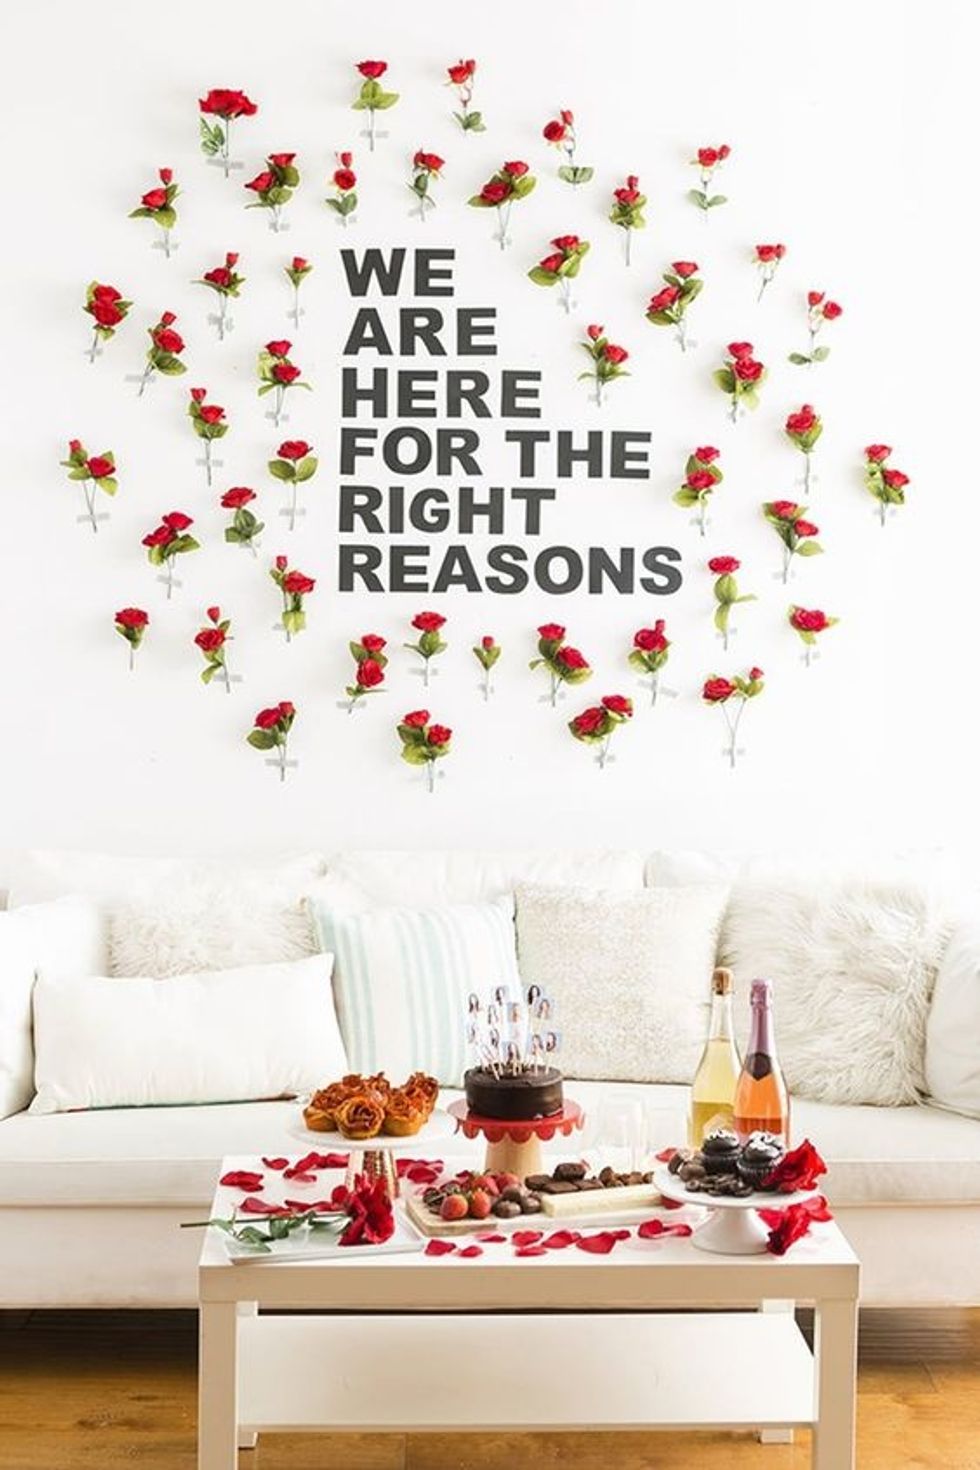 The Bachelor themed party with rose petals and chocolate